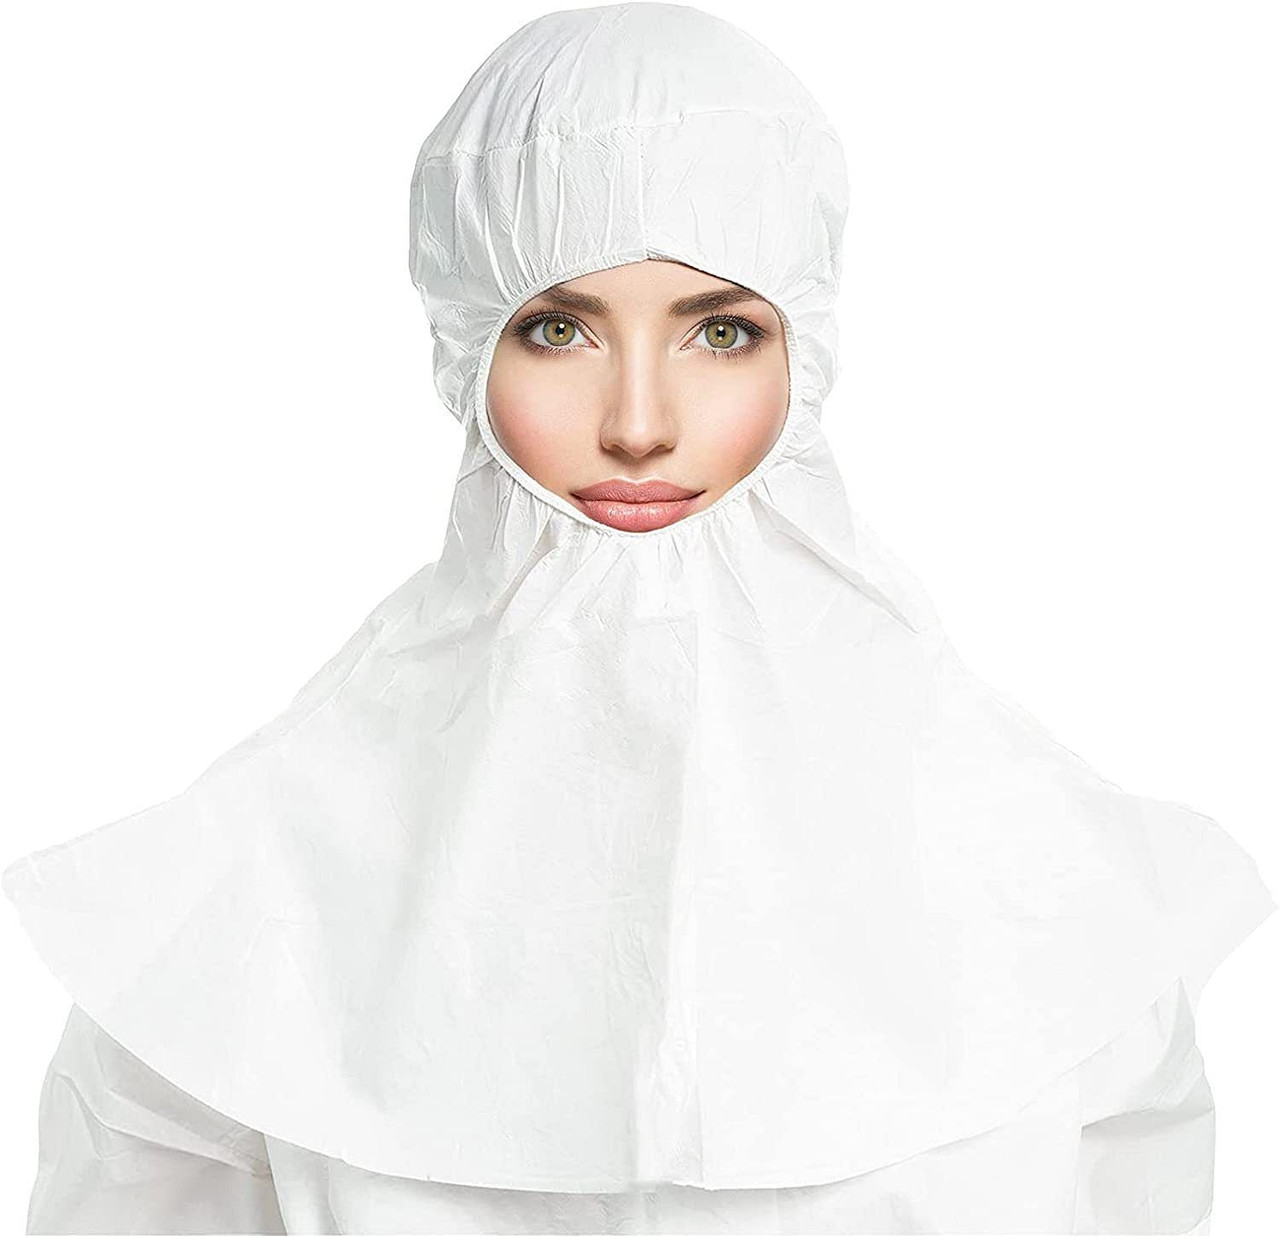 Protective Hoods in Bulk. Pack of 100 Non-Sterile White Medium Microporous 60 gsm Hooded Caps. Disp